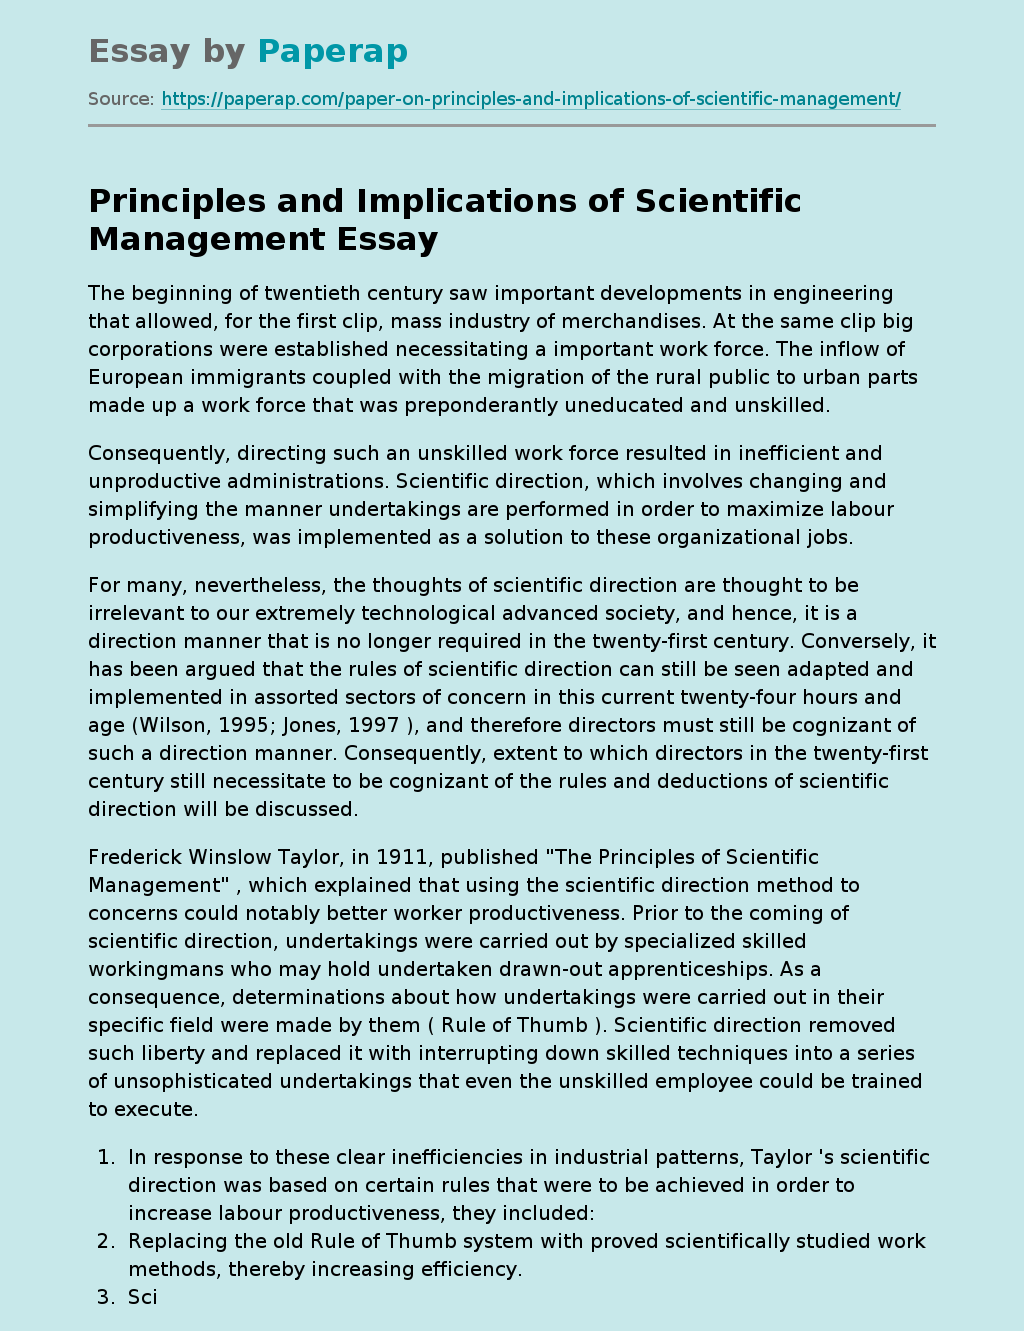 Principles and Implications of Scientific Management